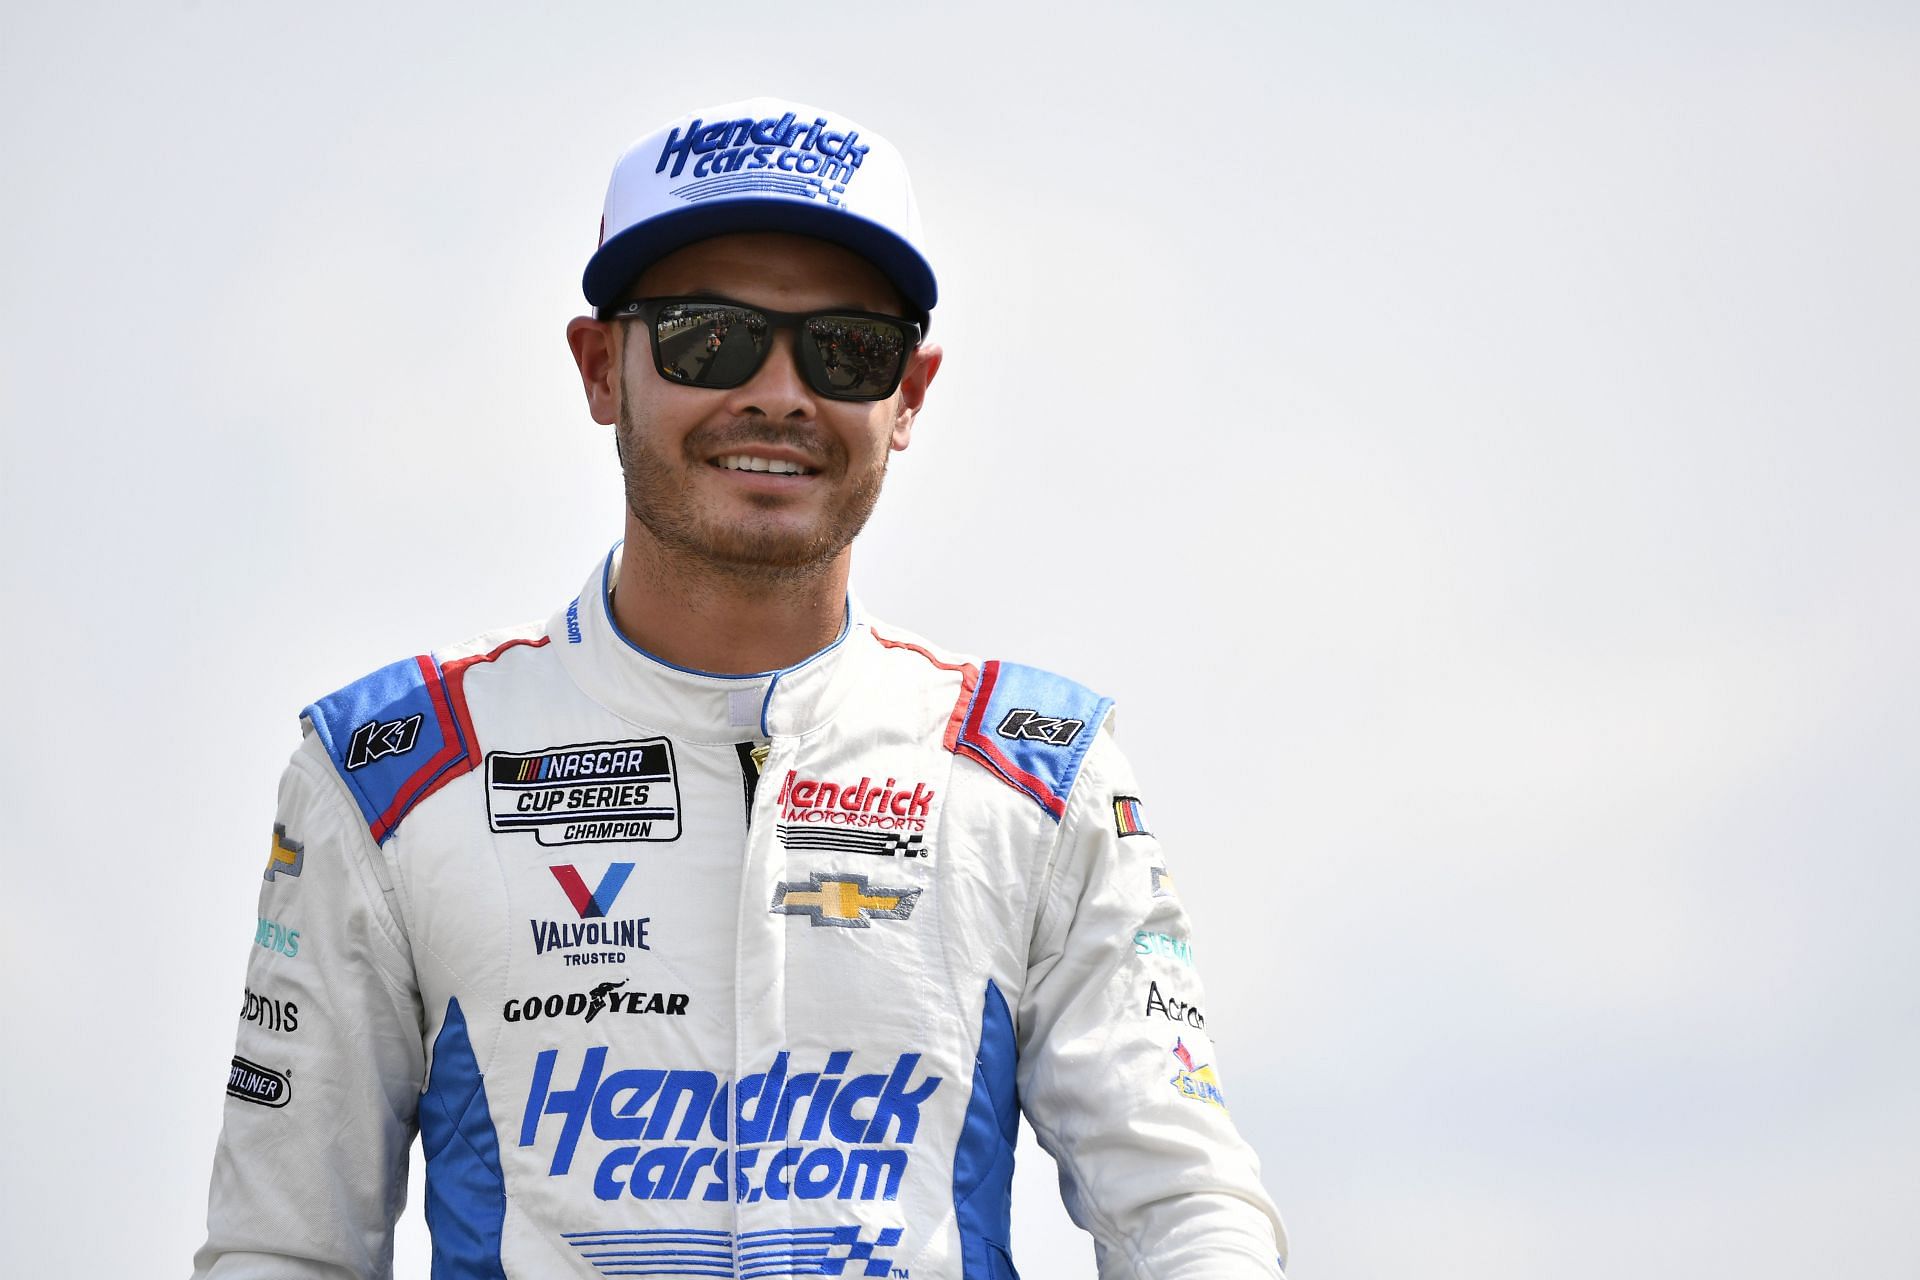 Kyle Larson walks onstage during driver intros before the 2022 NASCAR Cup Series Ally 400 at Nashville Superspeedway in Lebanon, Tennessee (Photo by Logan Riely/Getty Images)